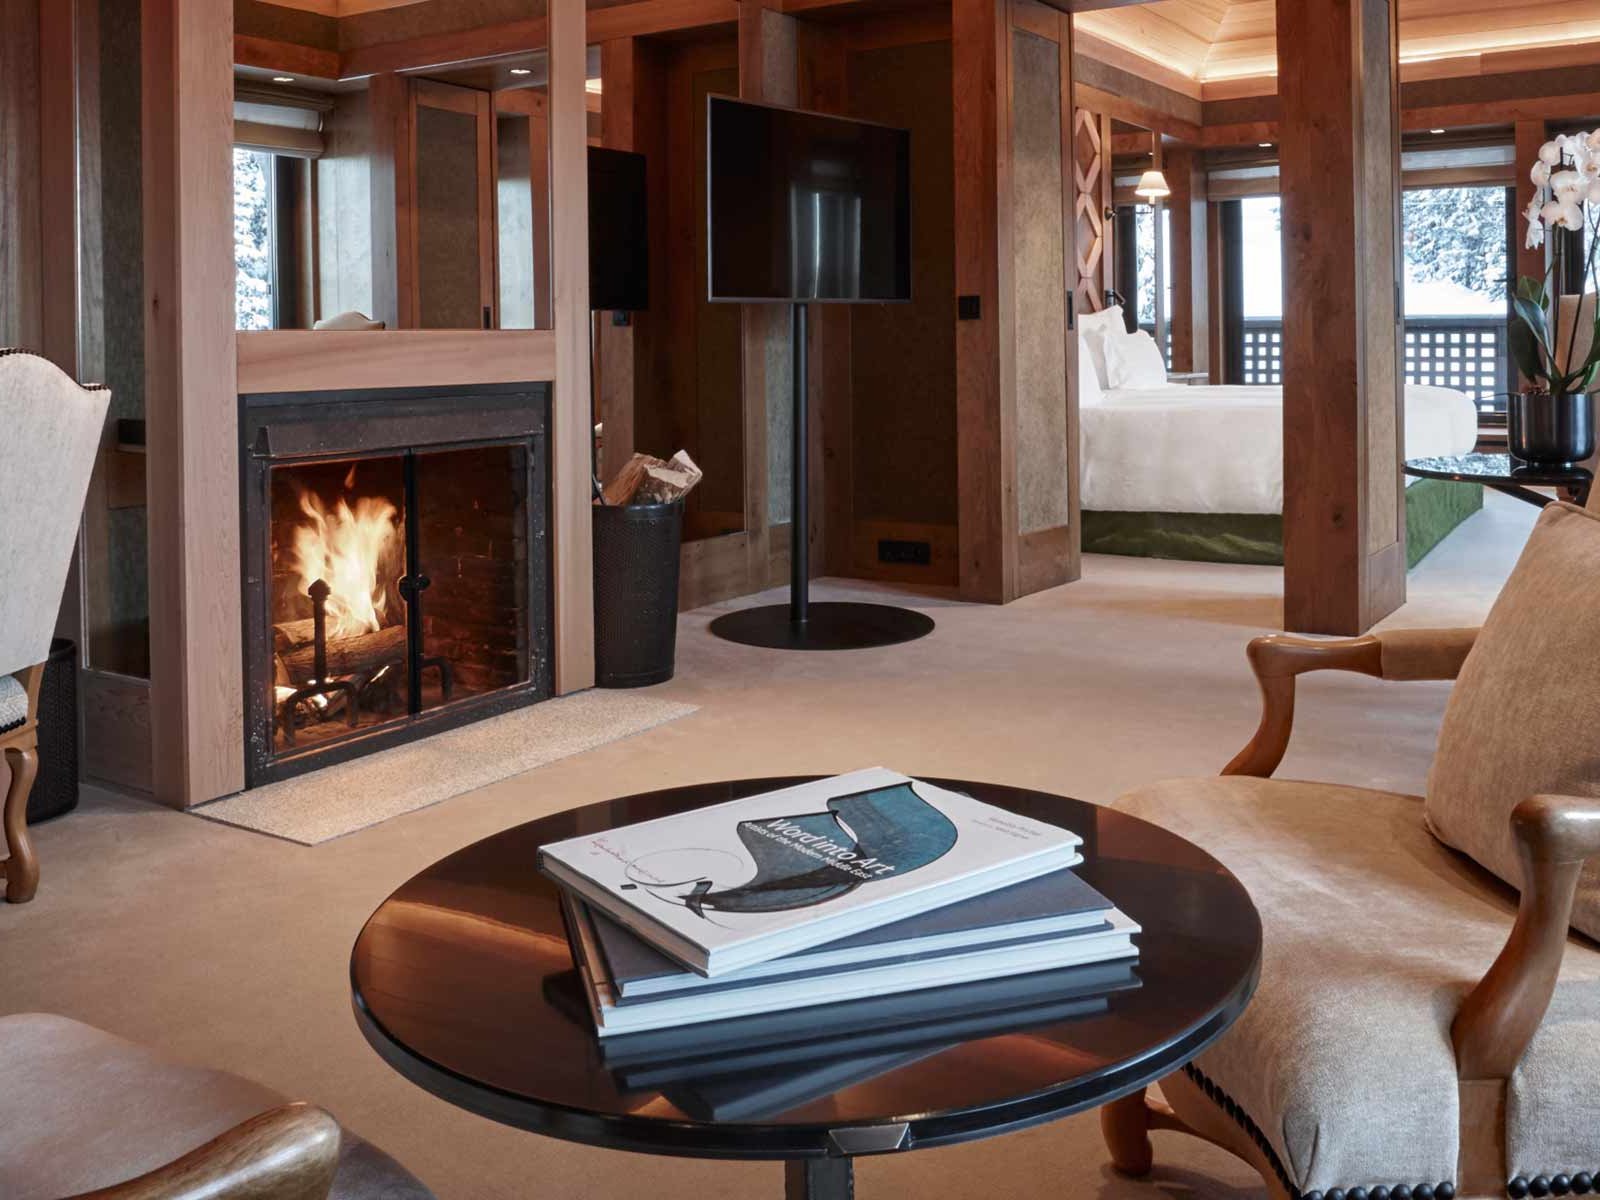 There is always a cosy atmosphere at the Aman Le Melézin&nbsp;in Courchevel, France.